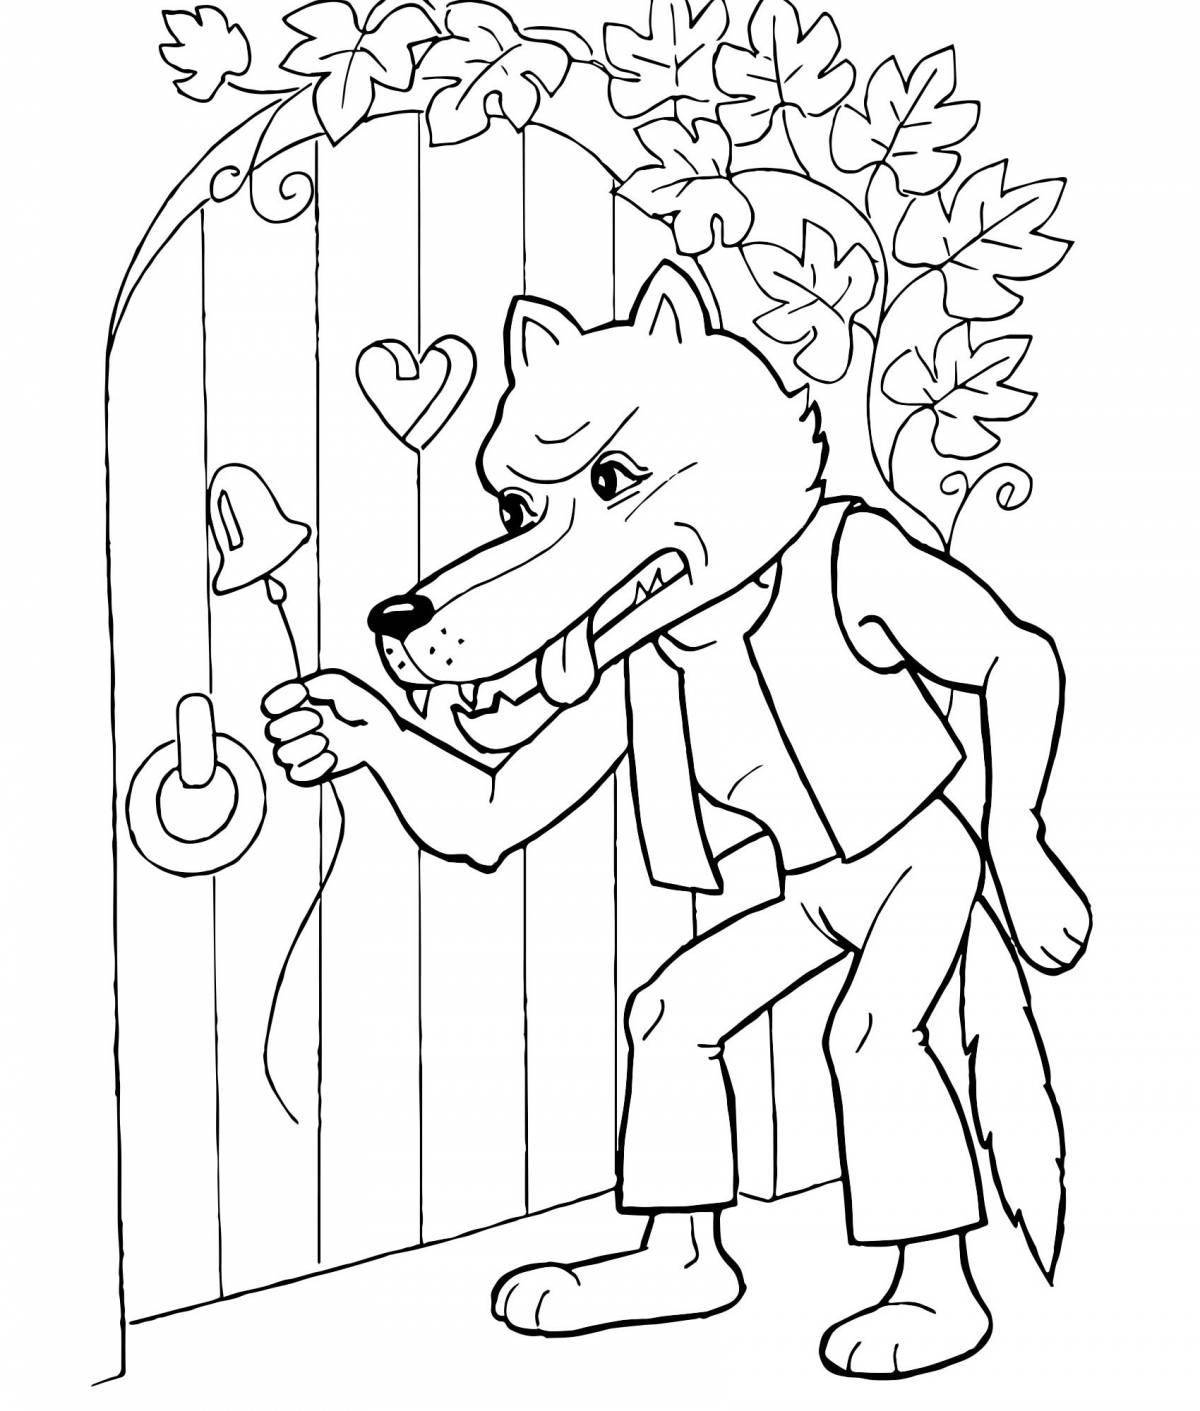 Coloring page sweet wolf and seven children